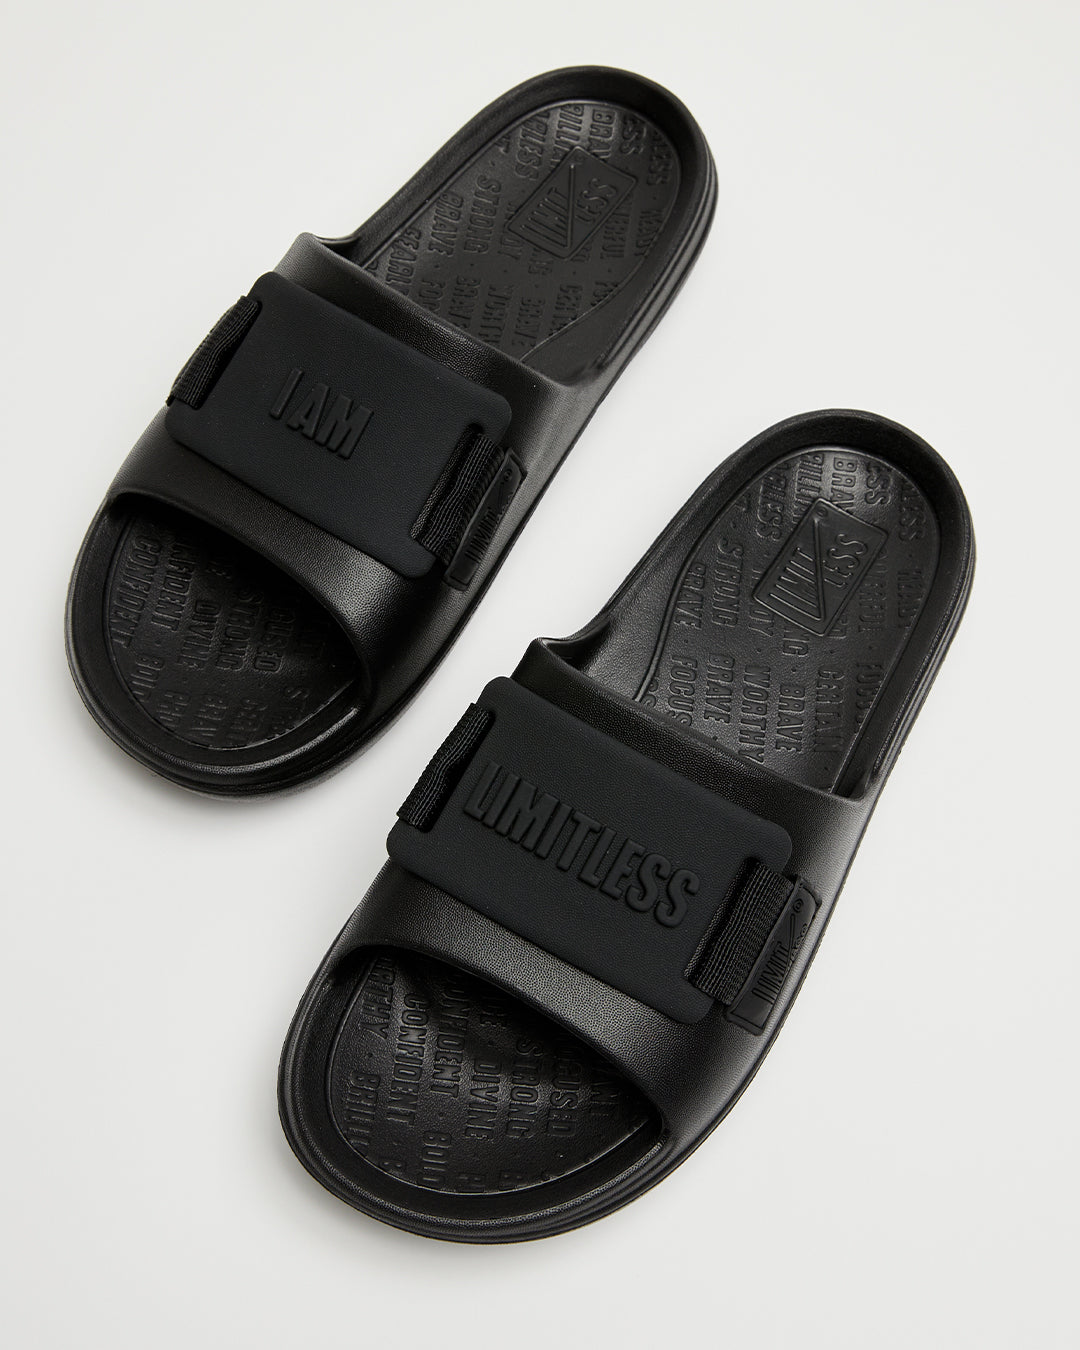 LIMITLESS SLIDES™ WITH ESSENTIAL TIBAH™ QUAD - MATER BAY ACADEMY EDITION